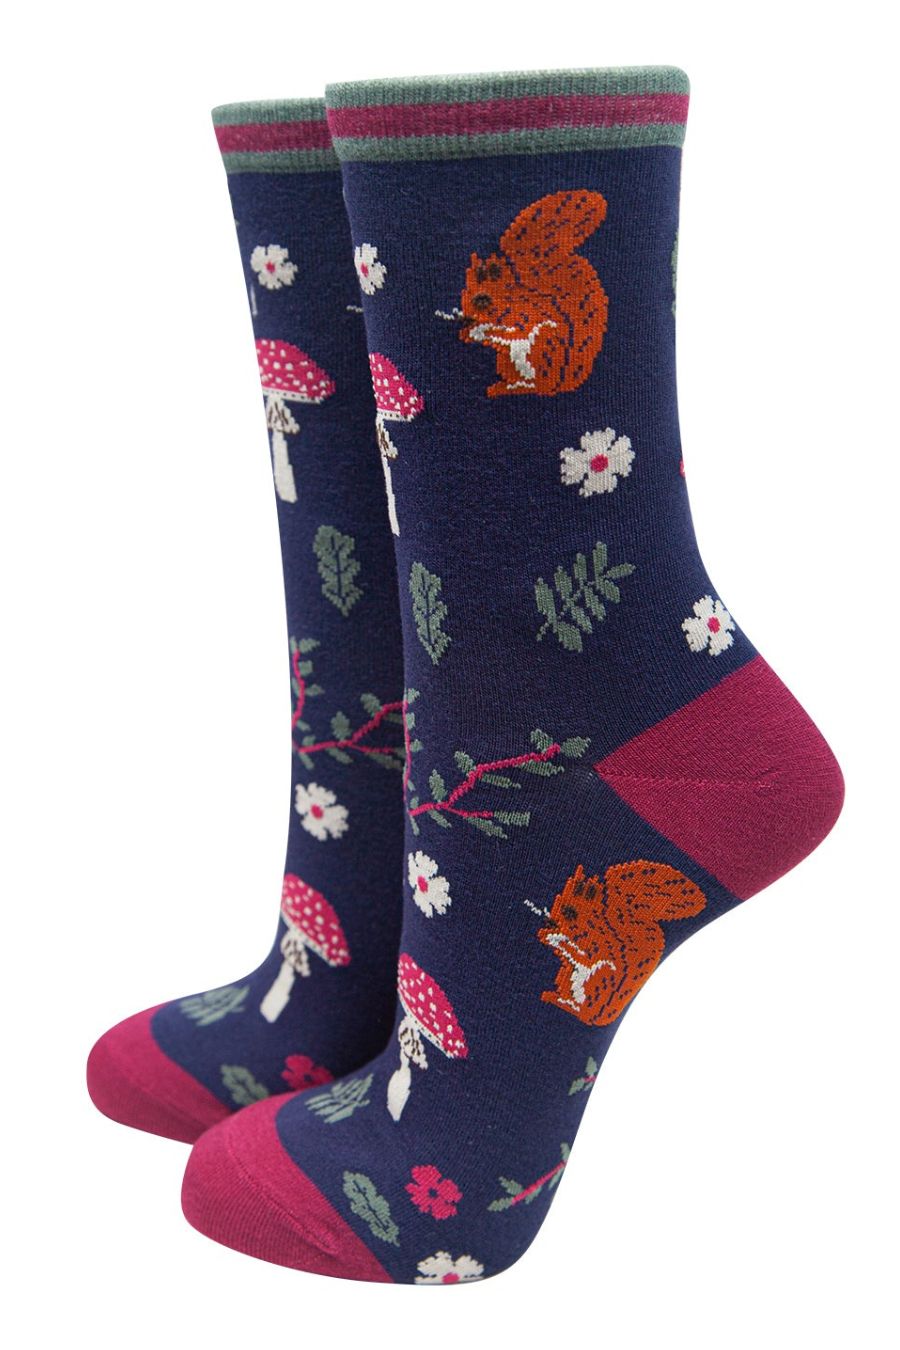 navy blue, pink ankle socks with red squirrels, toadstools and flowers